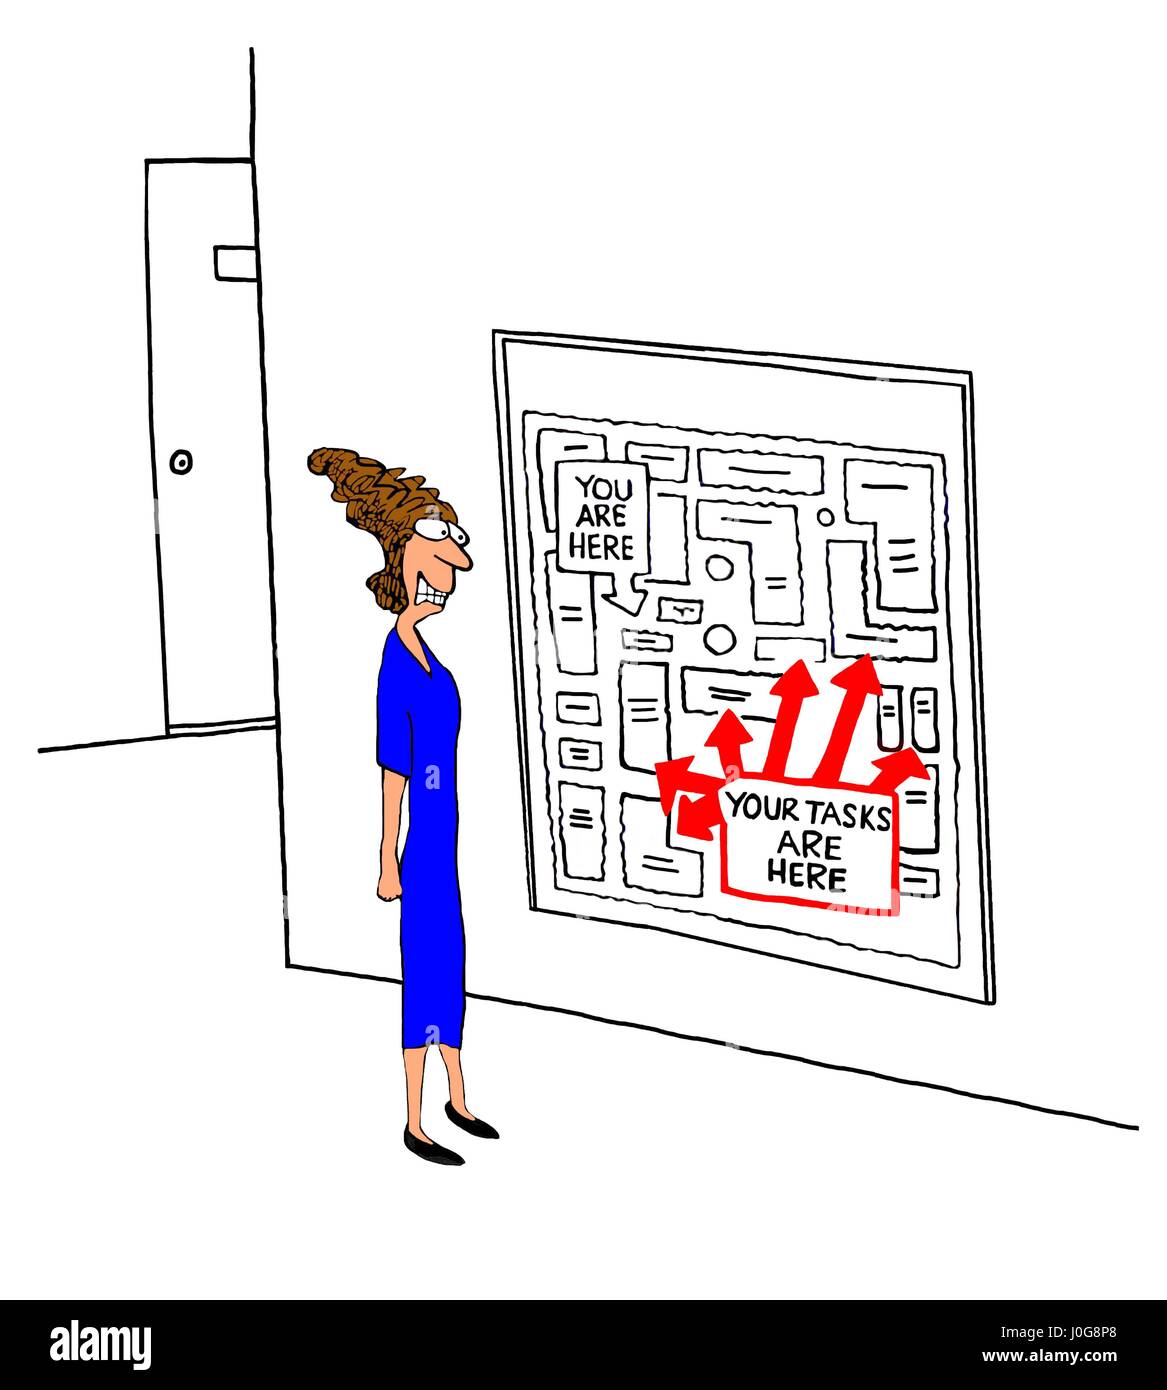 Business cartoon about a woman stressed by seeing all the tasks she must complete. Stock Photo